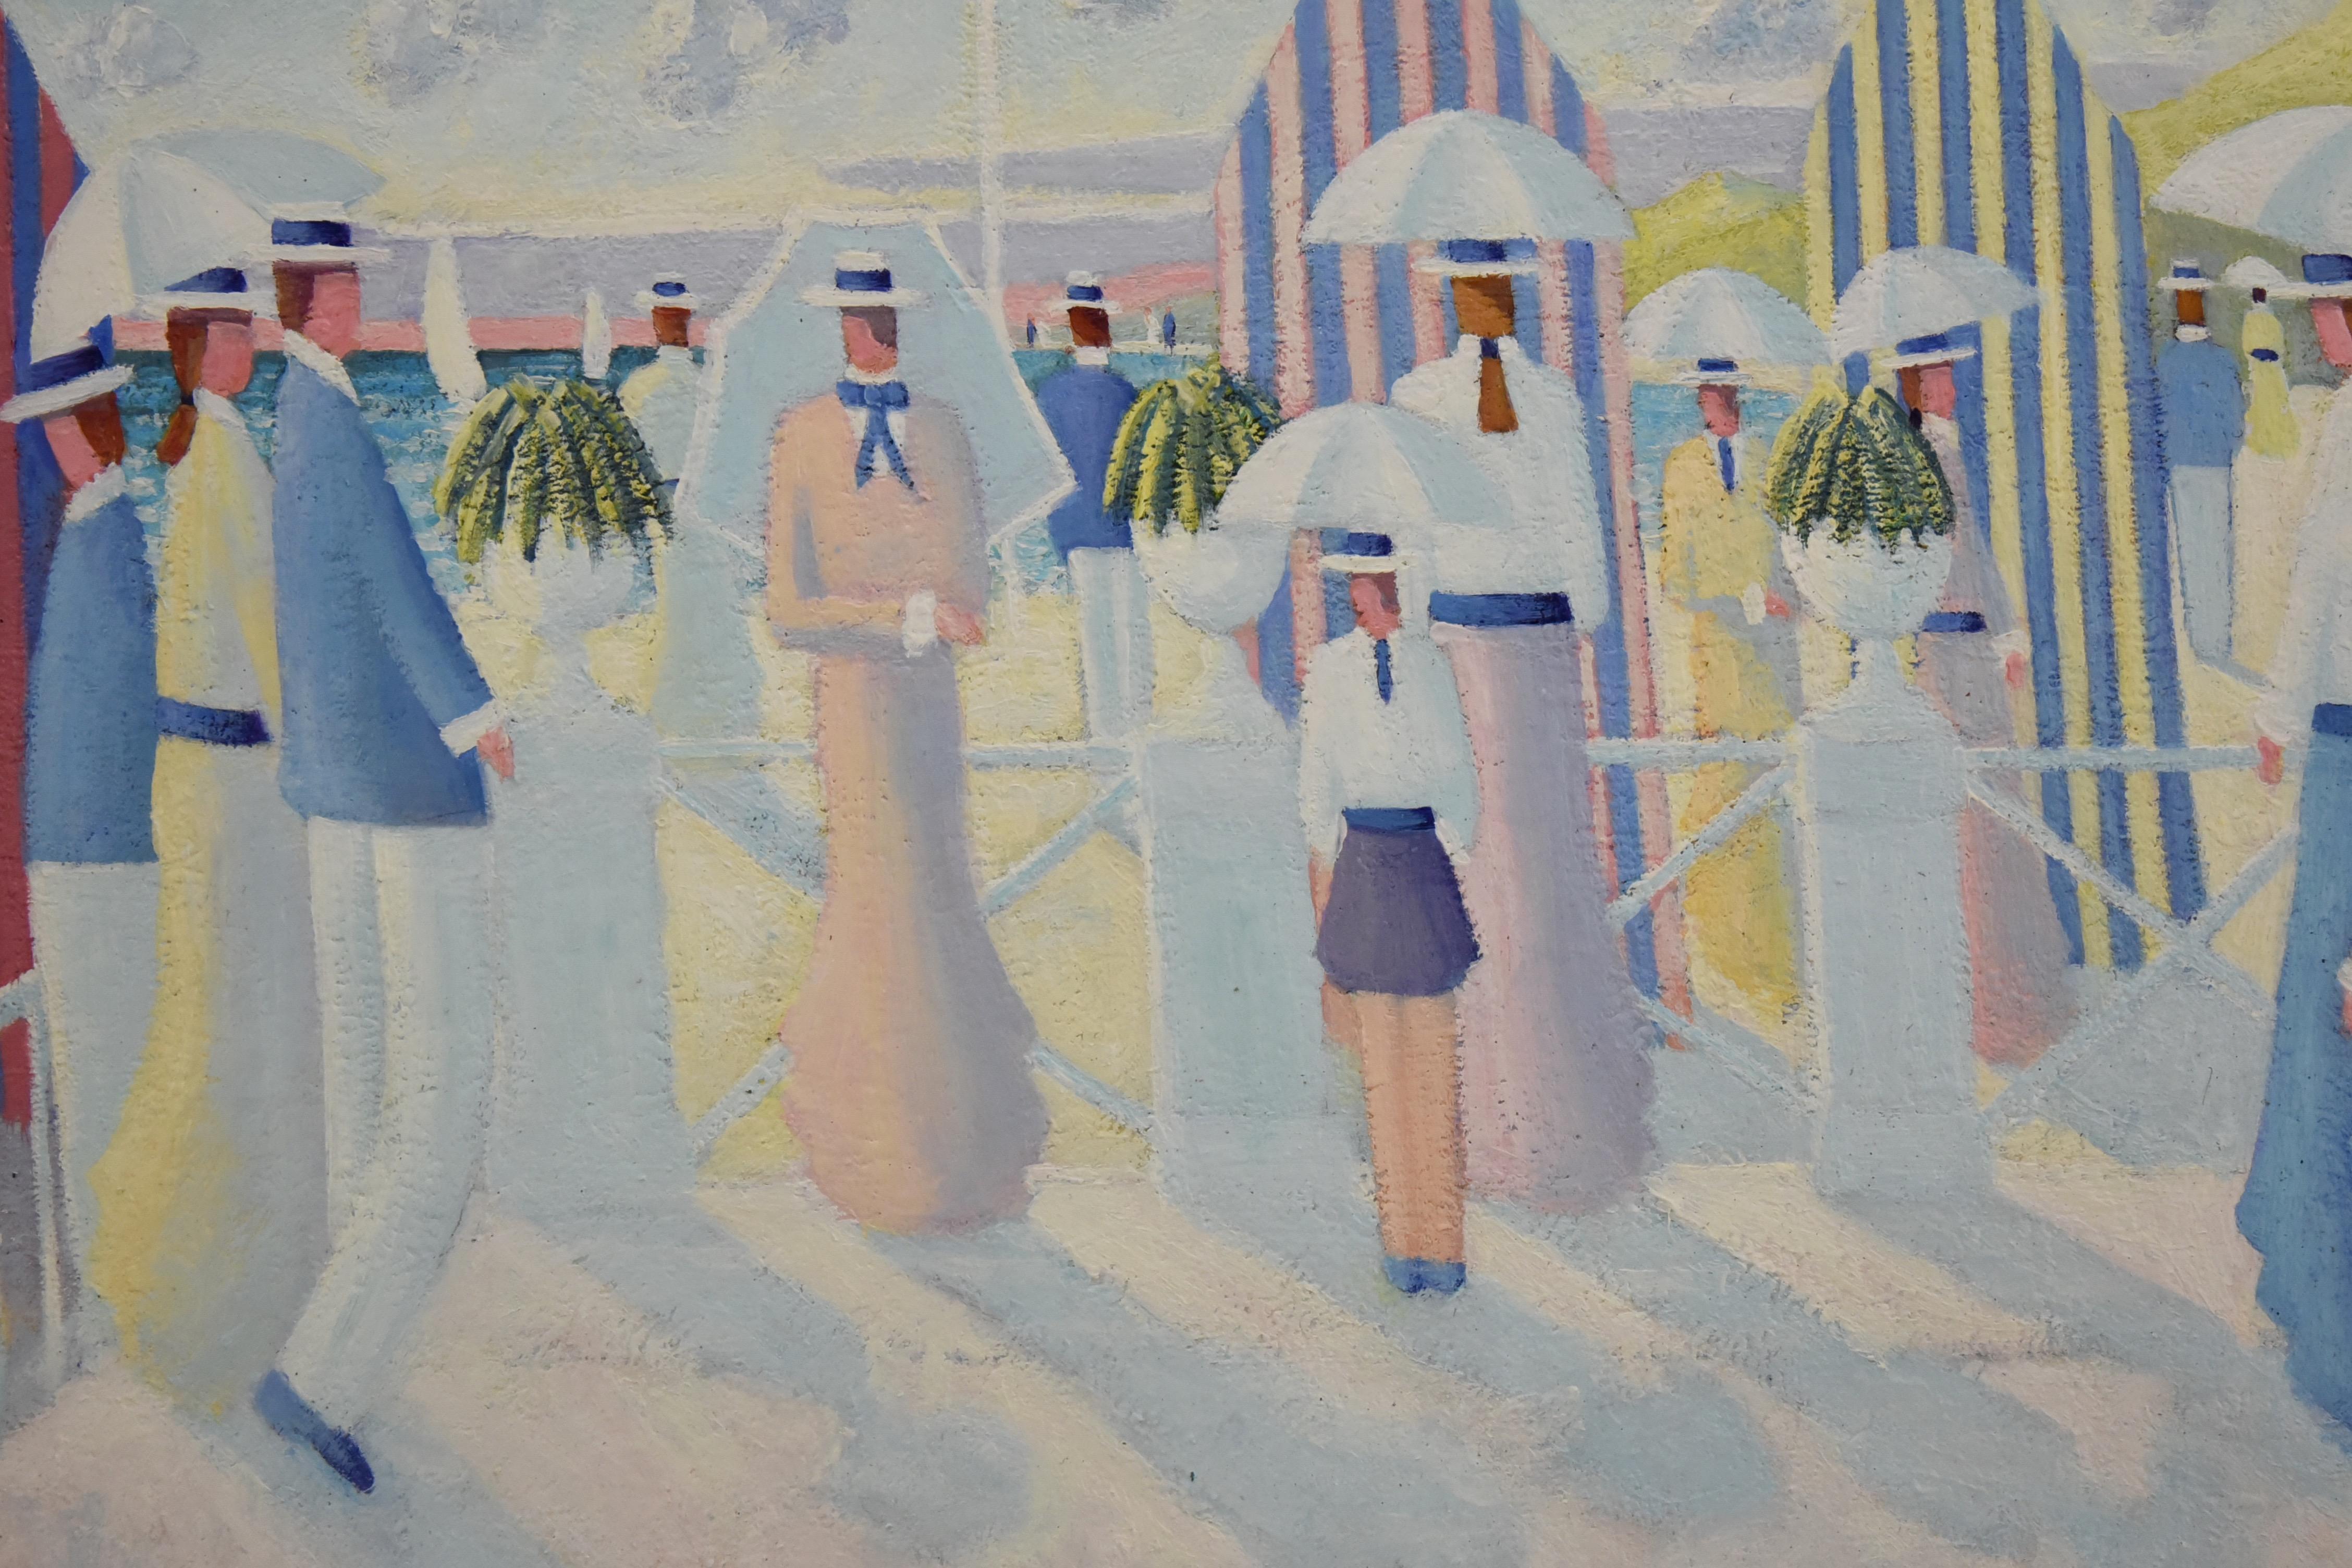 Belgian Painting of People on the Beach Promenade Deauville France by Paul Frans